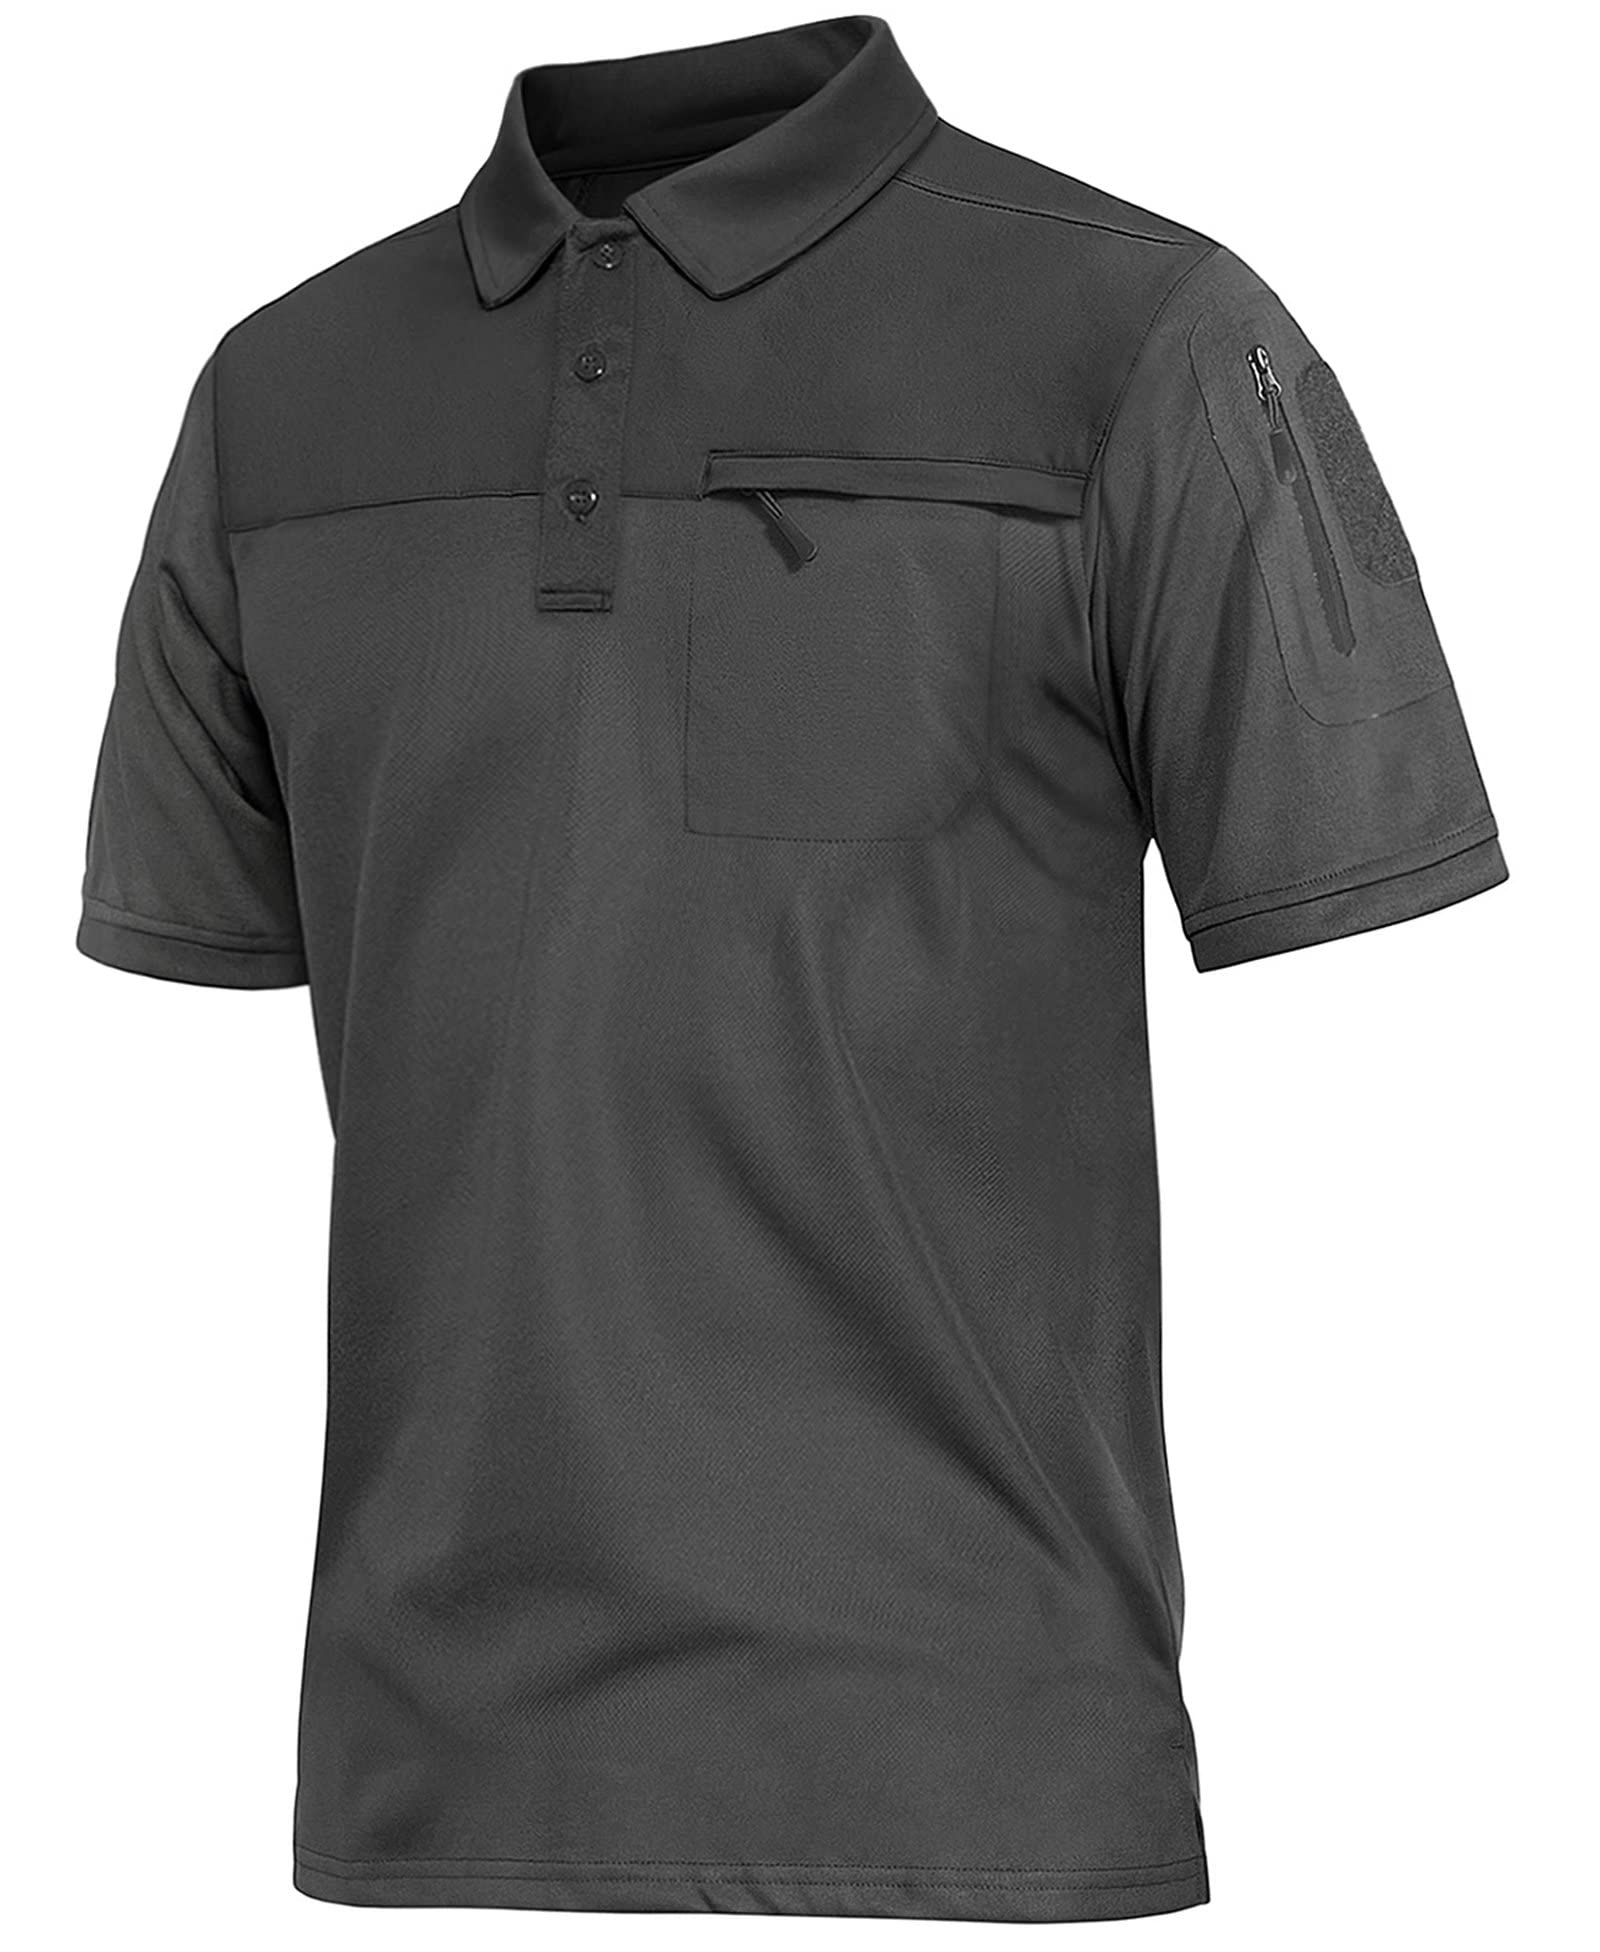 MAGNIVIT Men's Short Sleeve Polo Shirt Outdoor Quick Dry Military Tactical Shirt Pullover